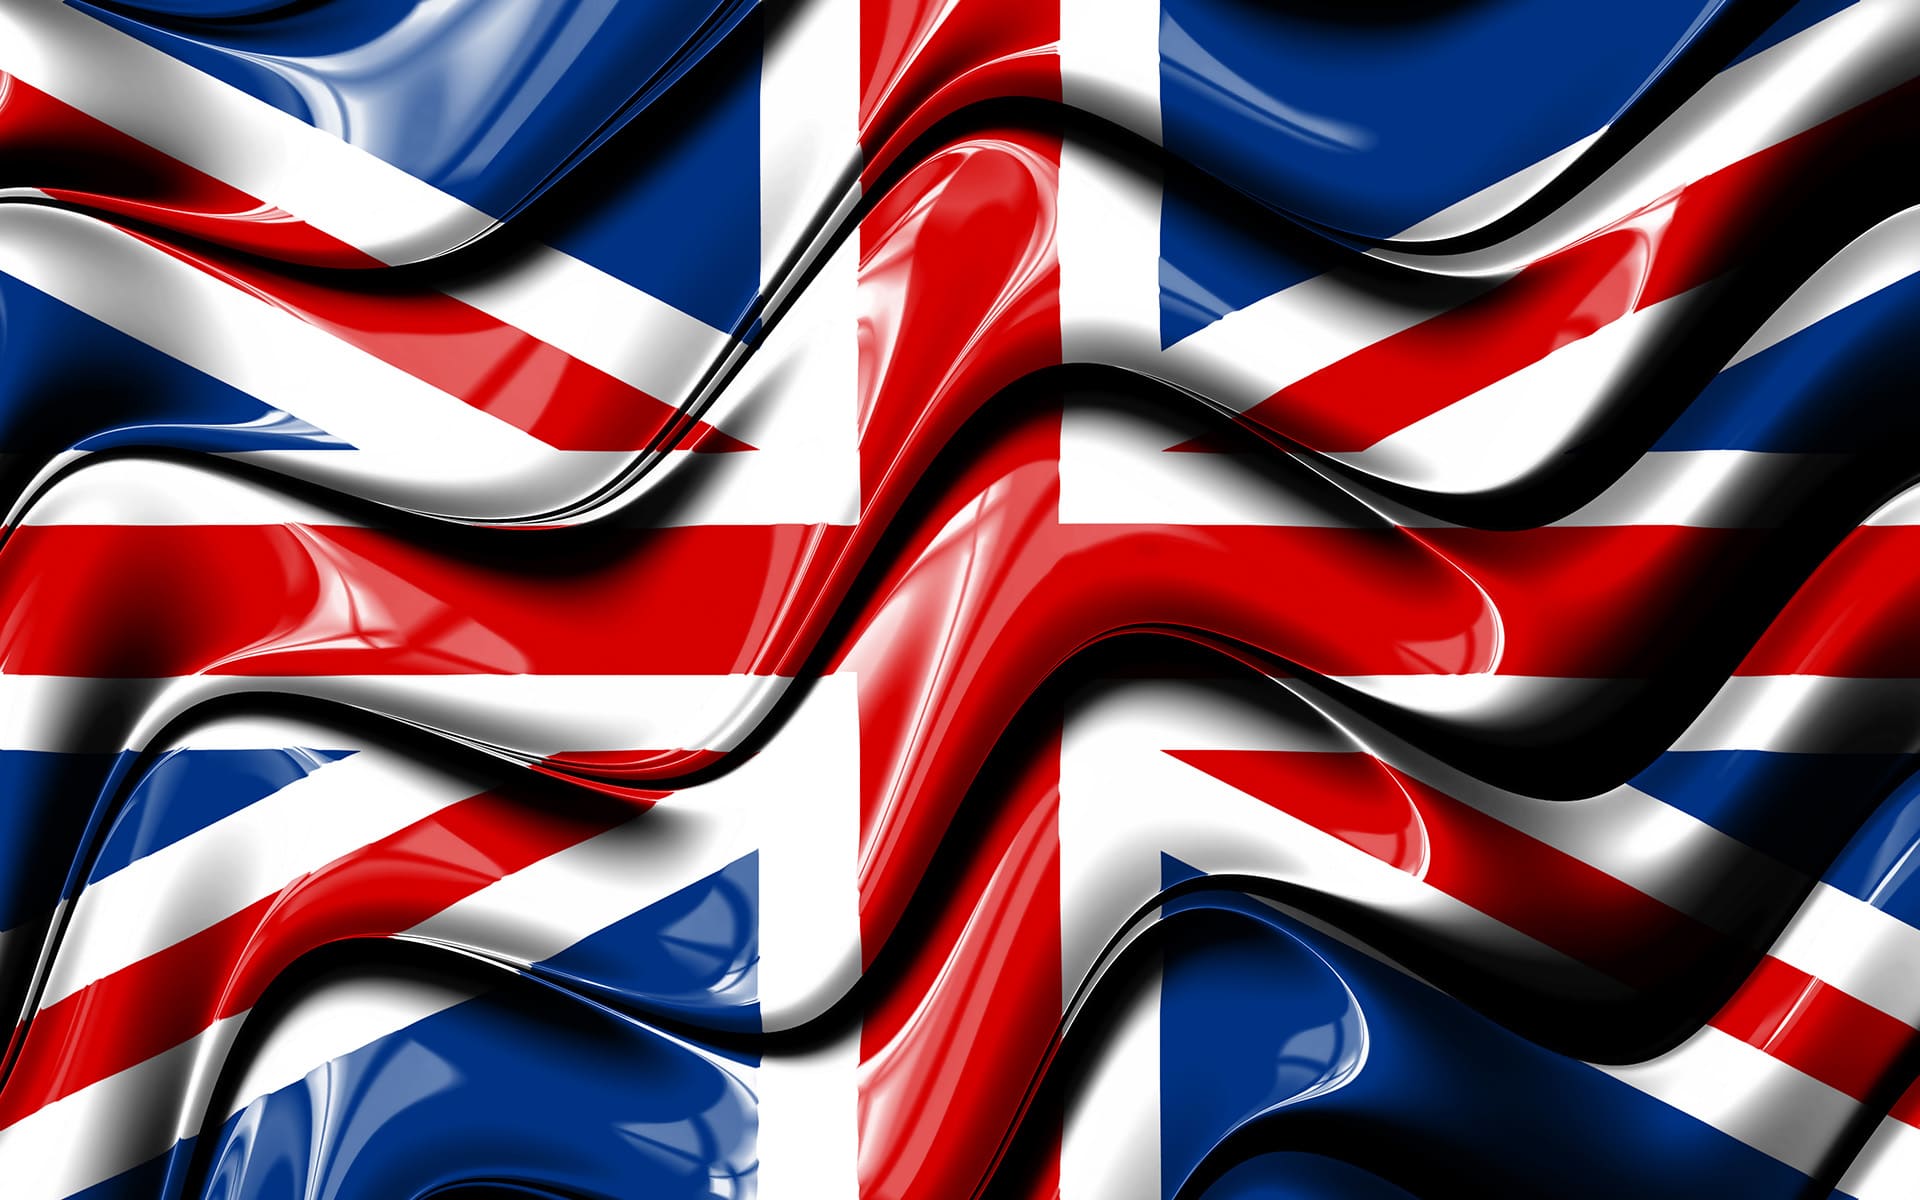 Union Jack Wallpapers